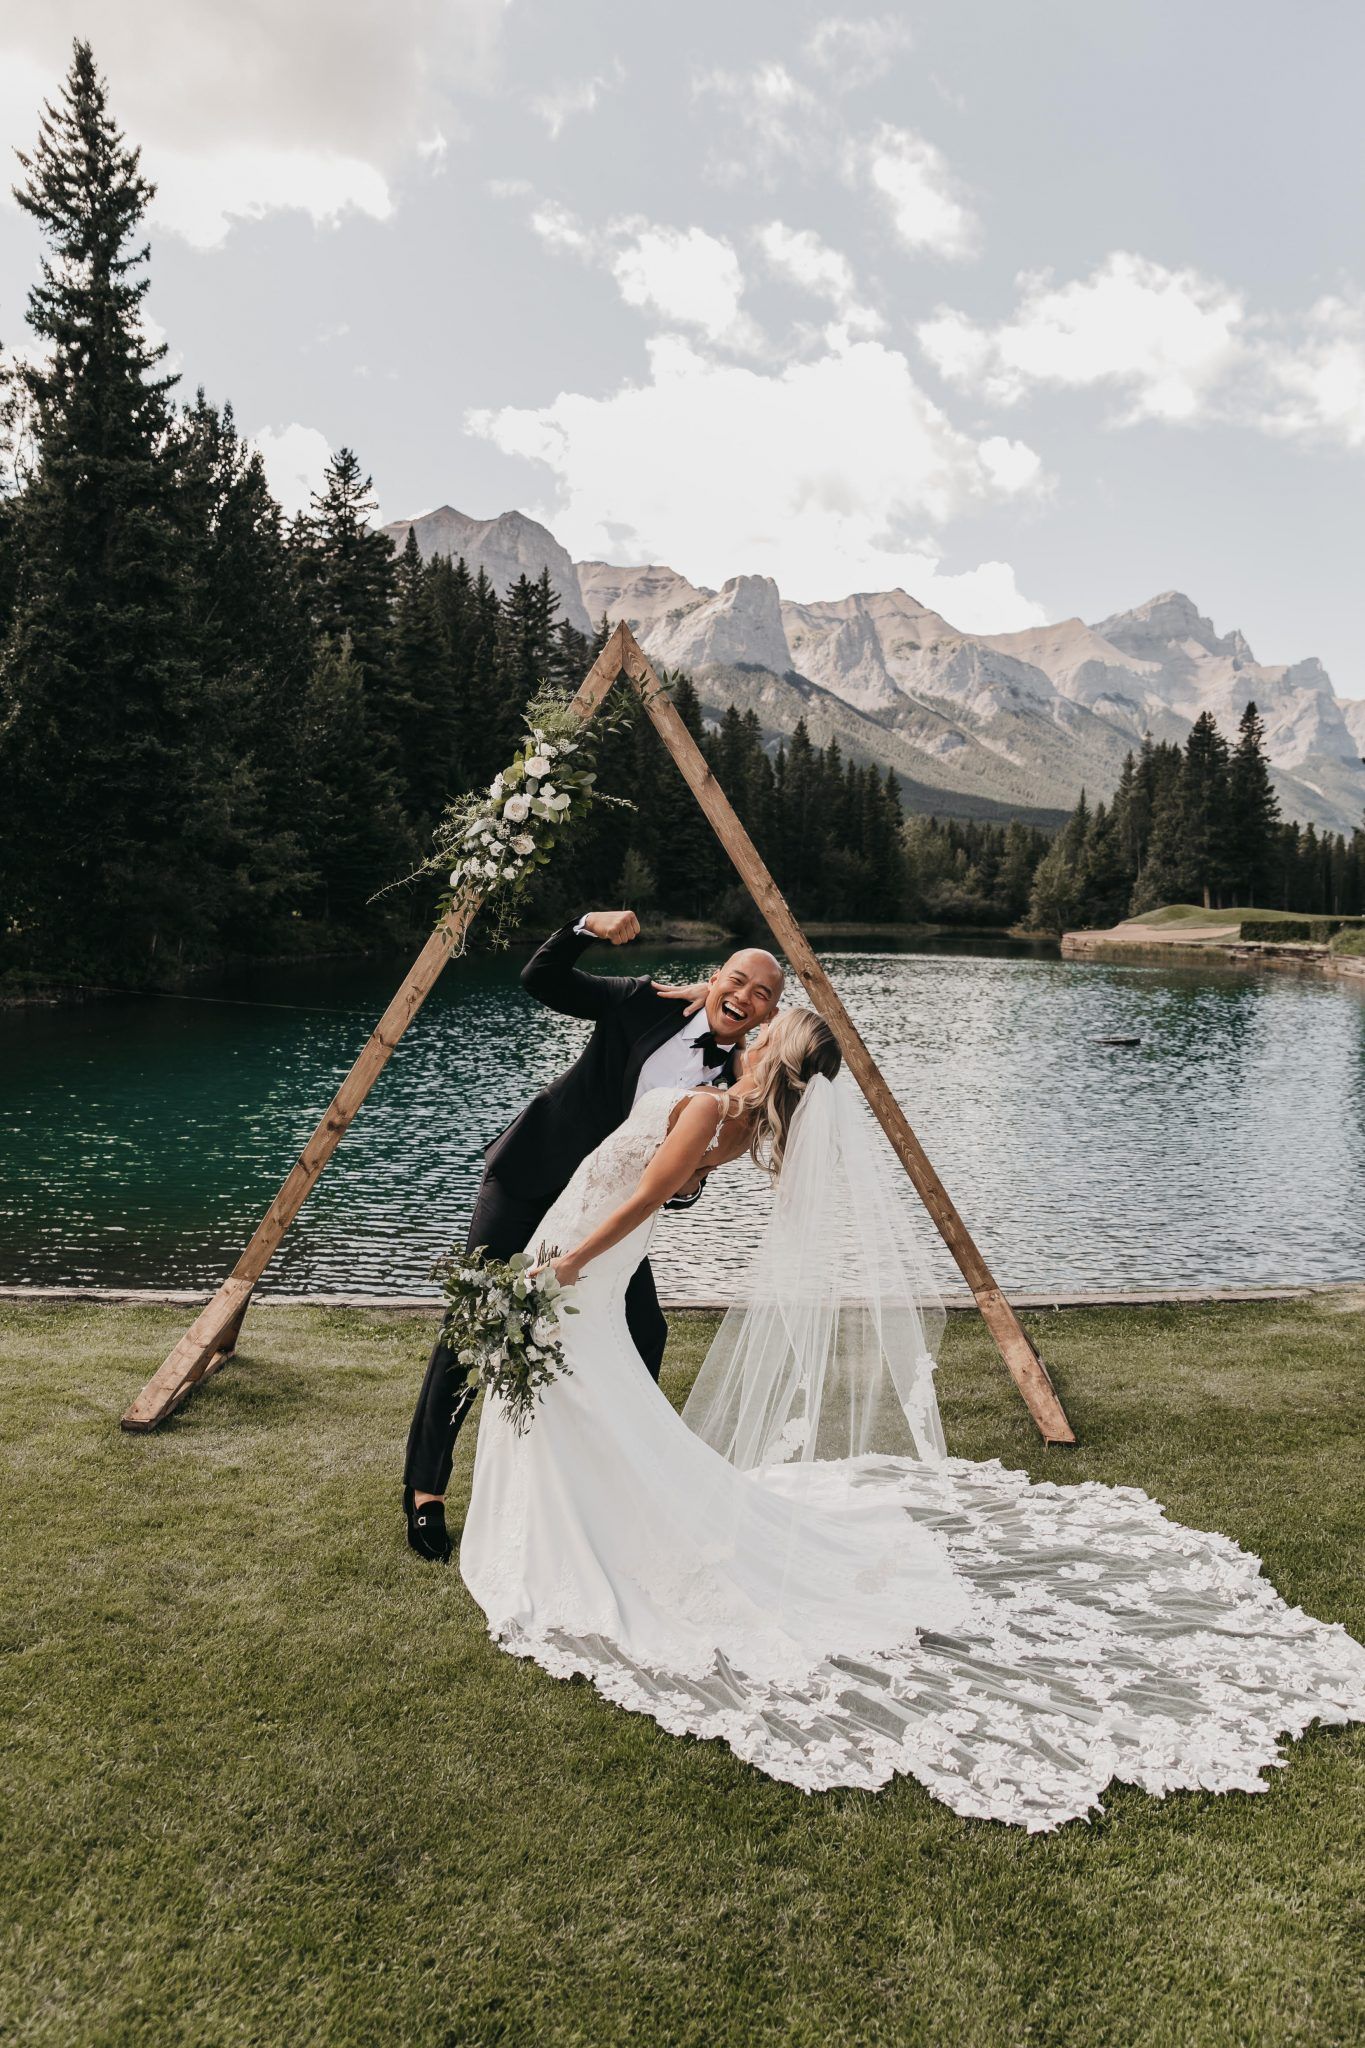 Covid-19 and Your Wedding // Part One: The Reality of Postponement - on the Bronte Bride Blog - Wedding Postponement how to, tips & advice from the pros, wedding arch, ceremony celebration, rocky mountain wedding